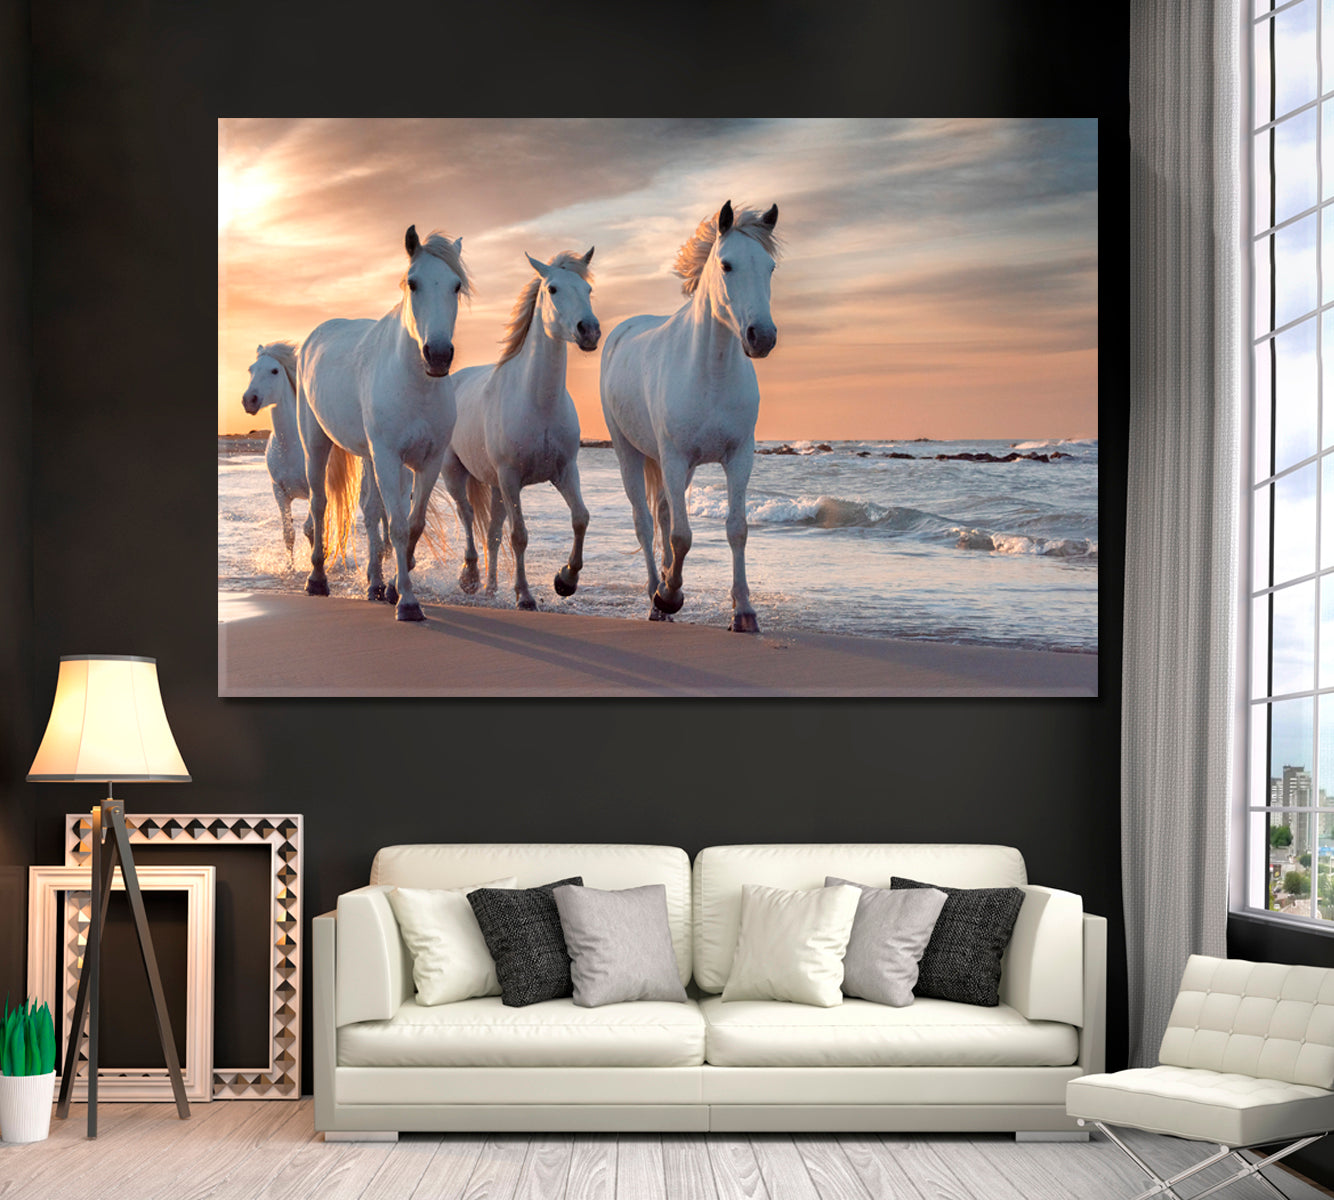 Herd of White Horses on Mediterranean Coast Camargue France Canvas Print ArtLexy 1 Panel 24"x16" inches 